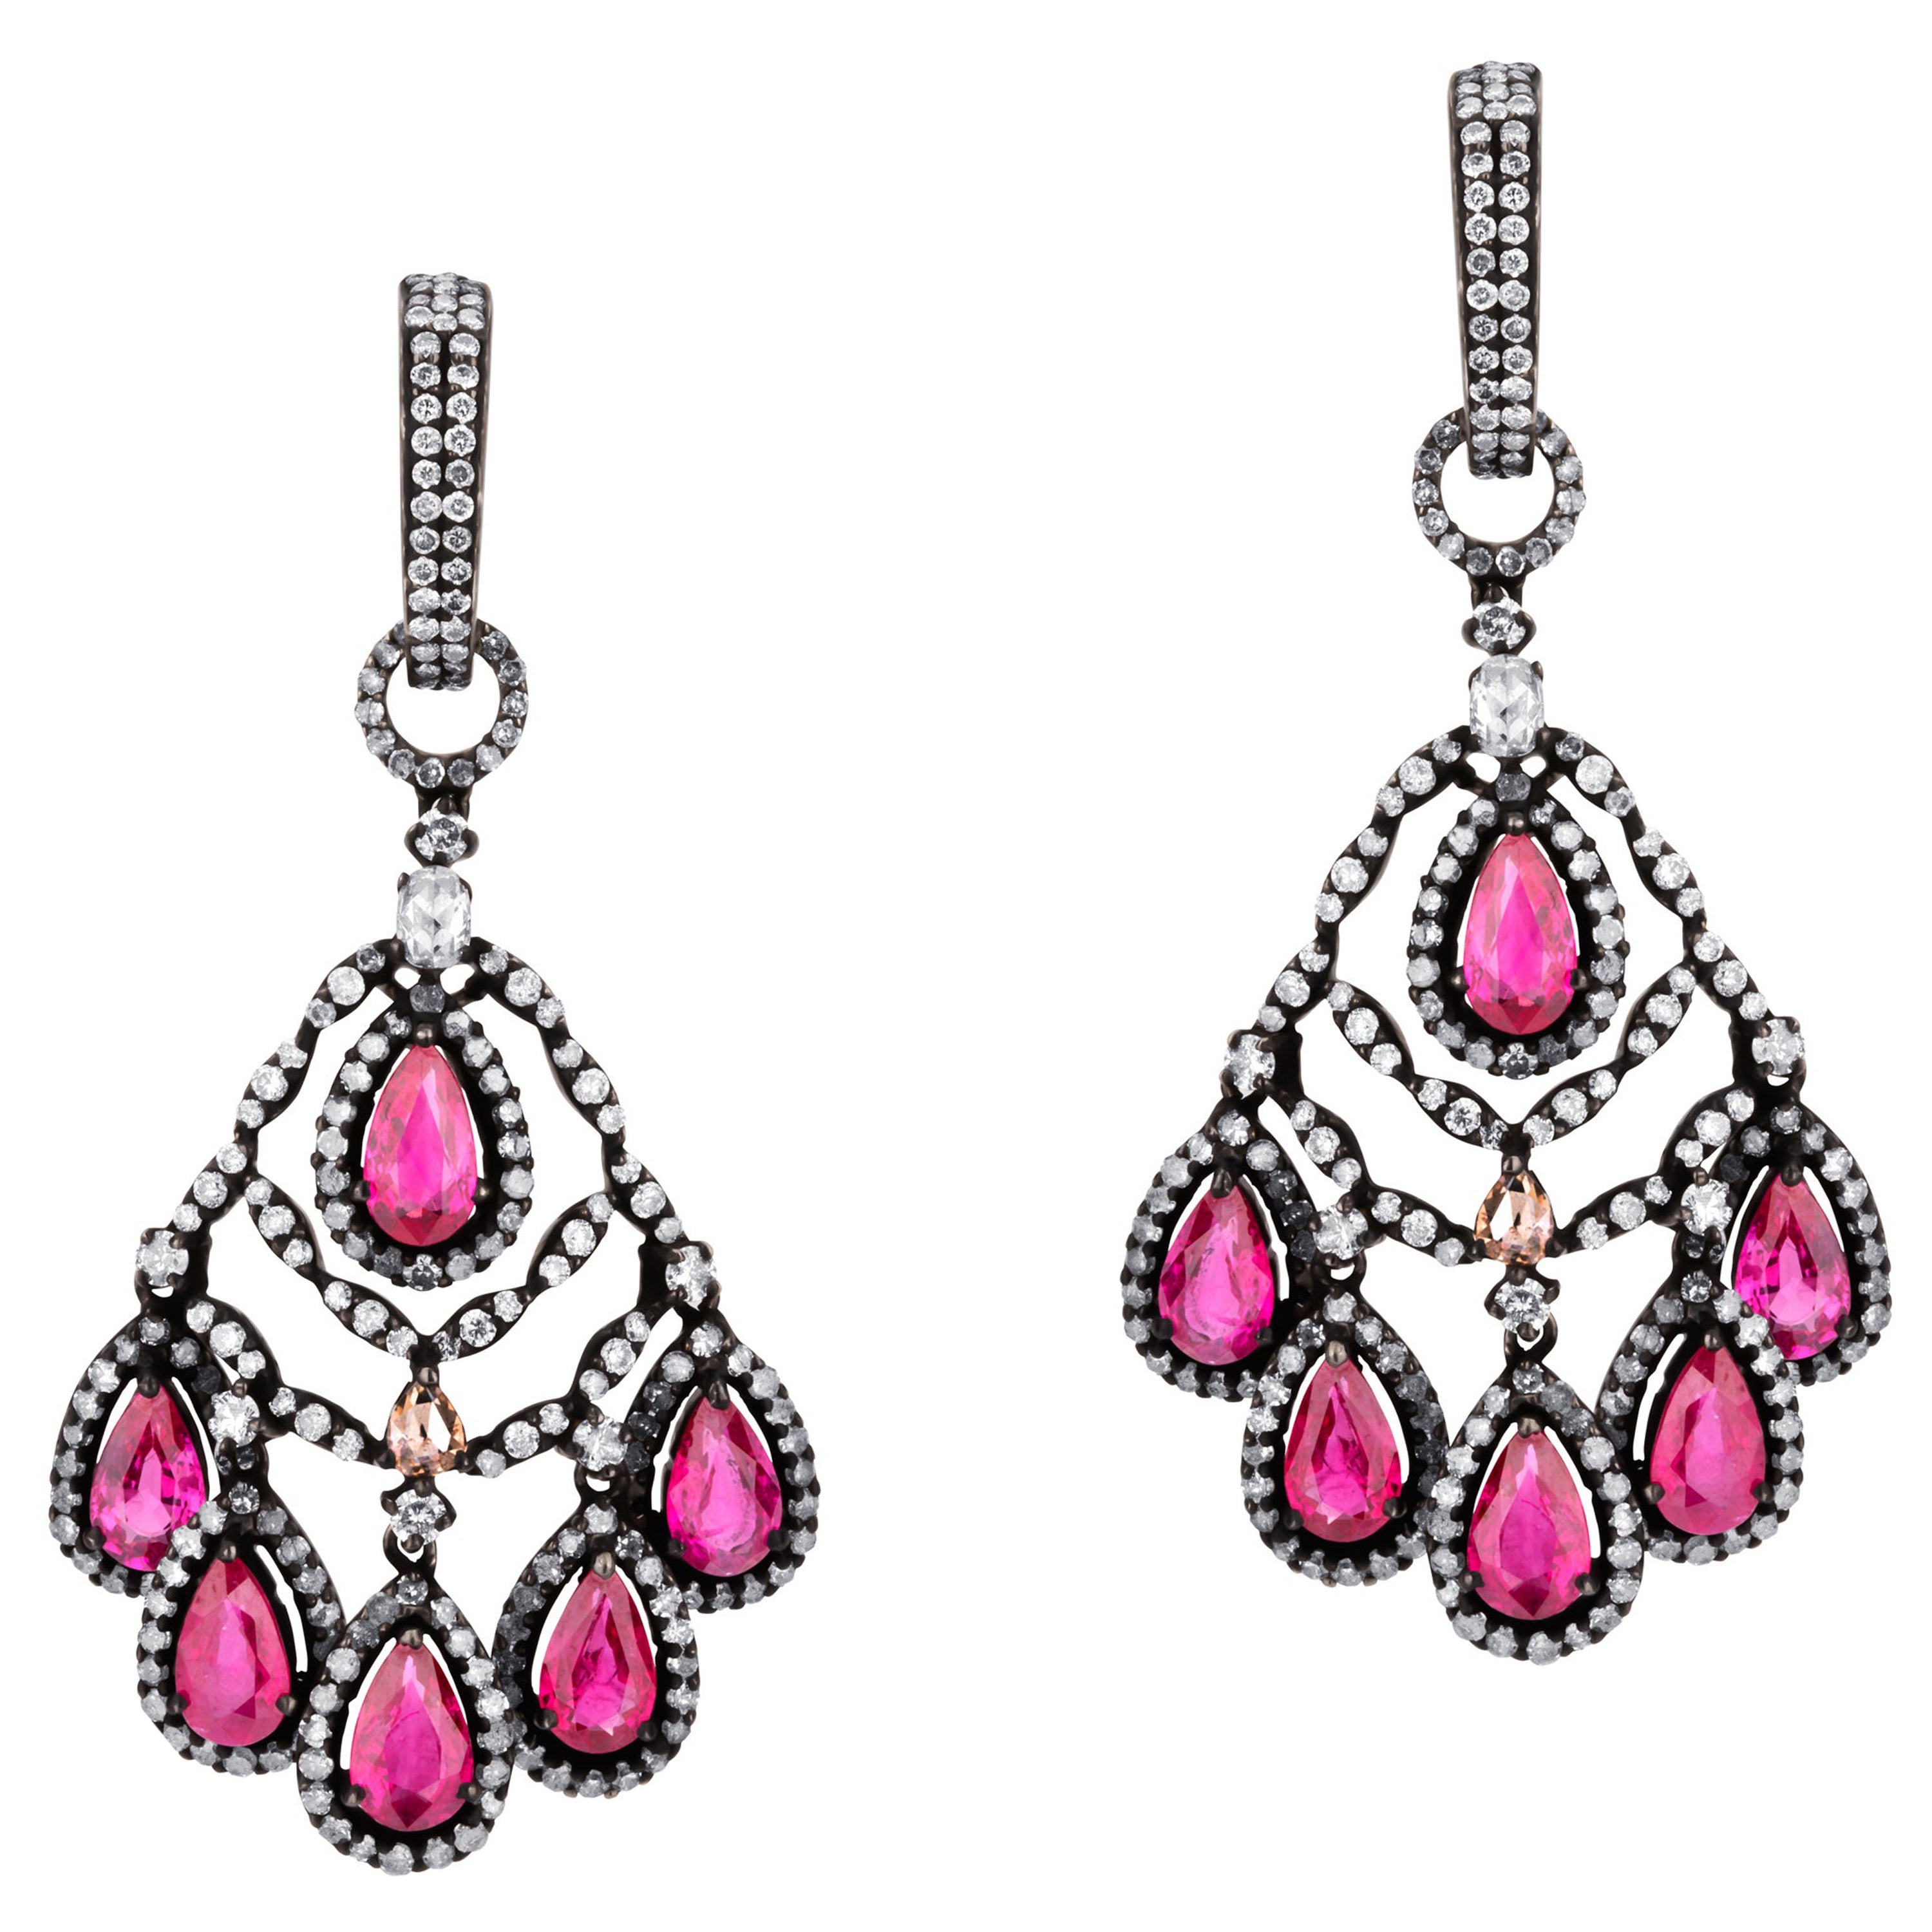 Victorian 10.61cttw Pear Ruby and Diamond Chandelier Earrings For Sale